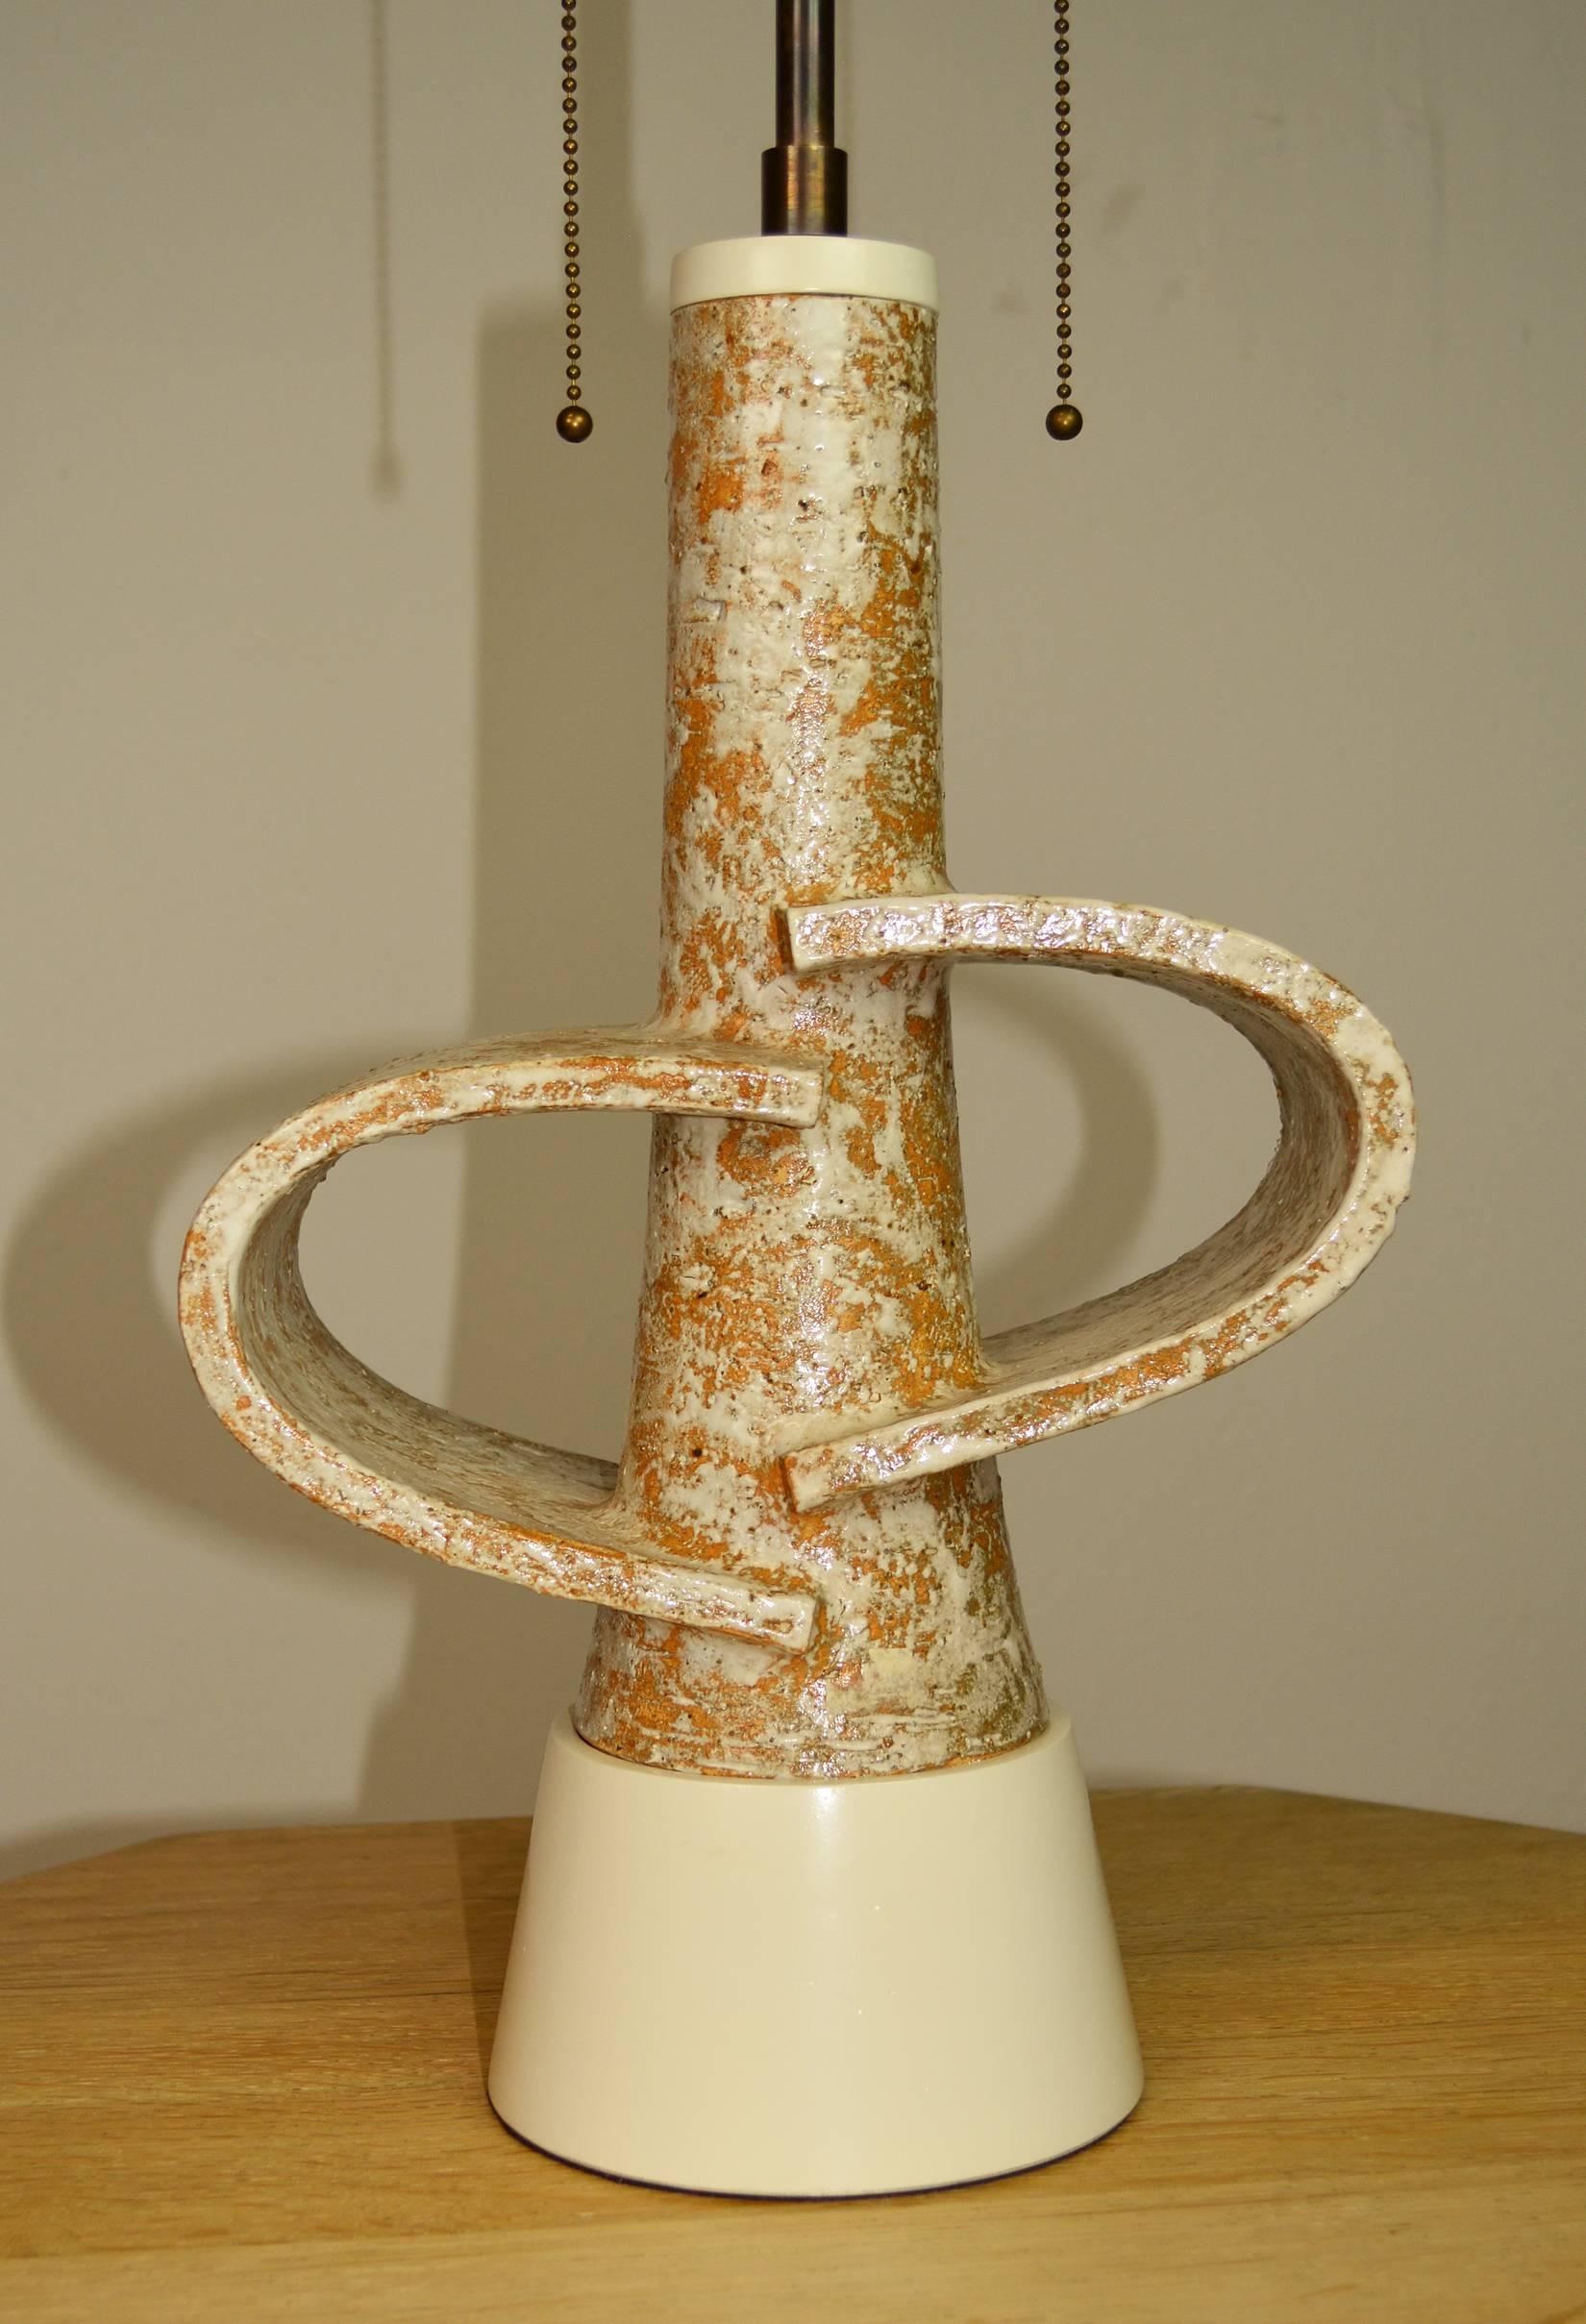 Sculptural lamp of rough glazed terracotta California Studio Pottery on a conforming painted wood base. New antique brass double cluster sockets with adjustable height shade holder and French braid silk cord. 23